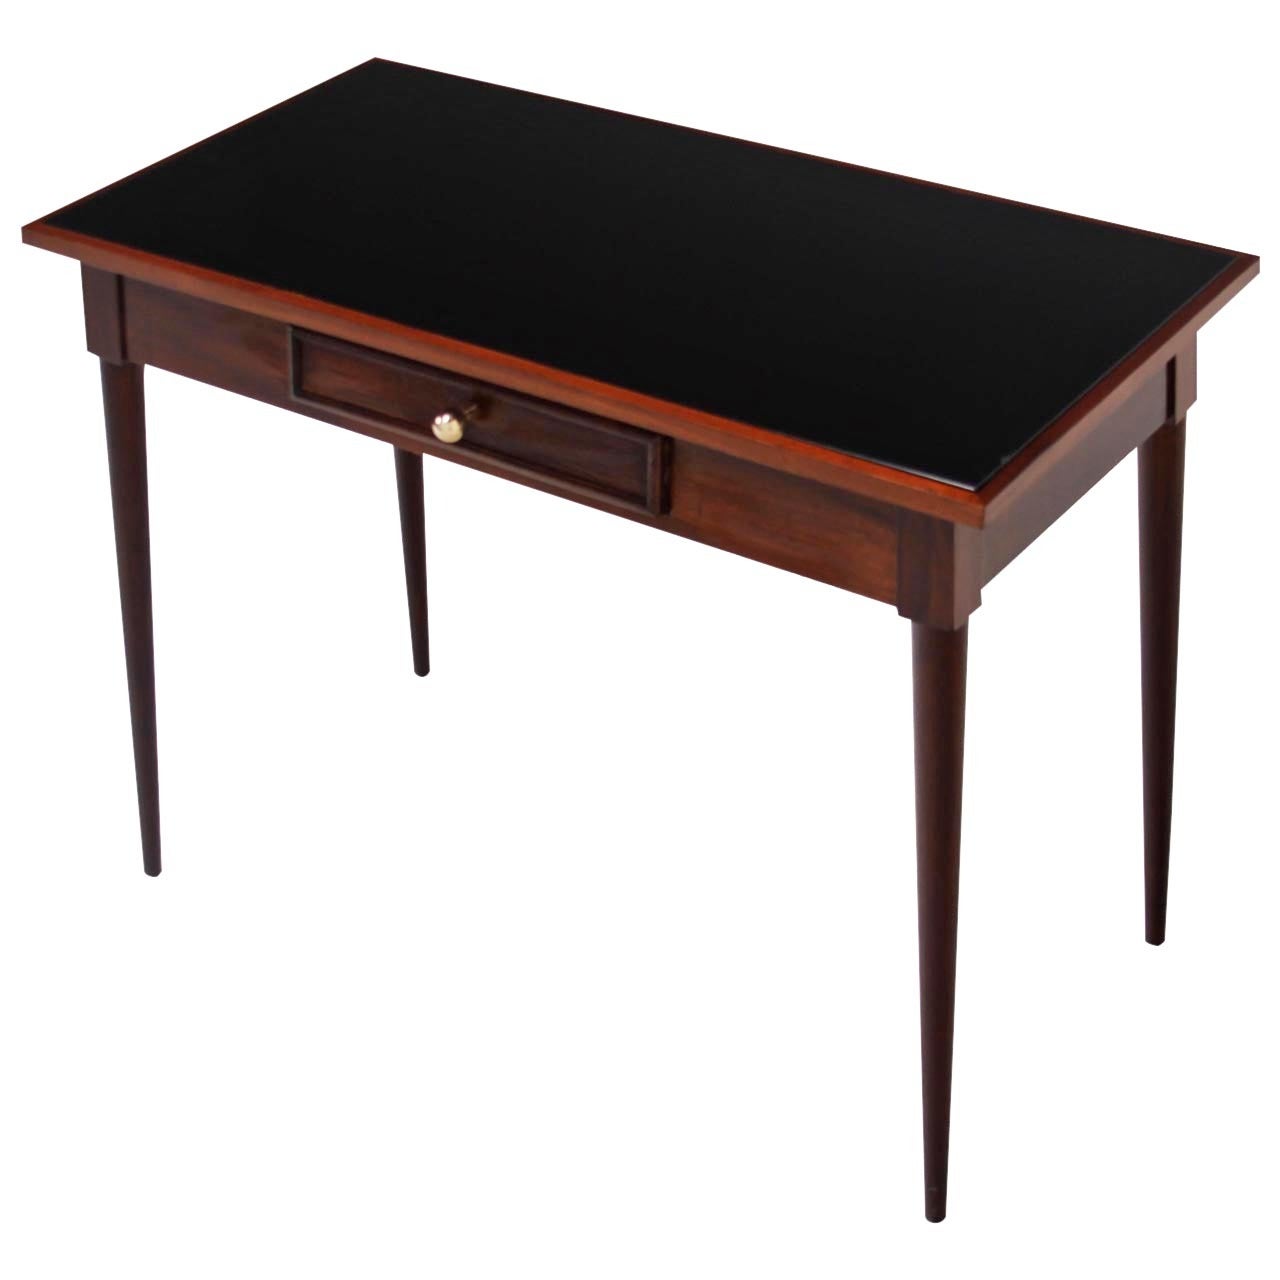 Giuseppe Scapinelli for Tepperman Freijo Table with Black Glass For Sale